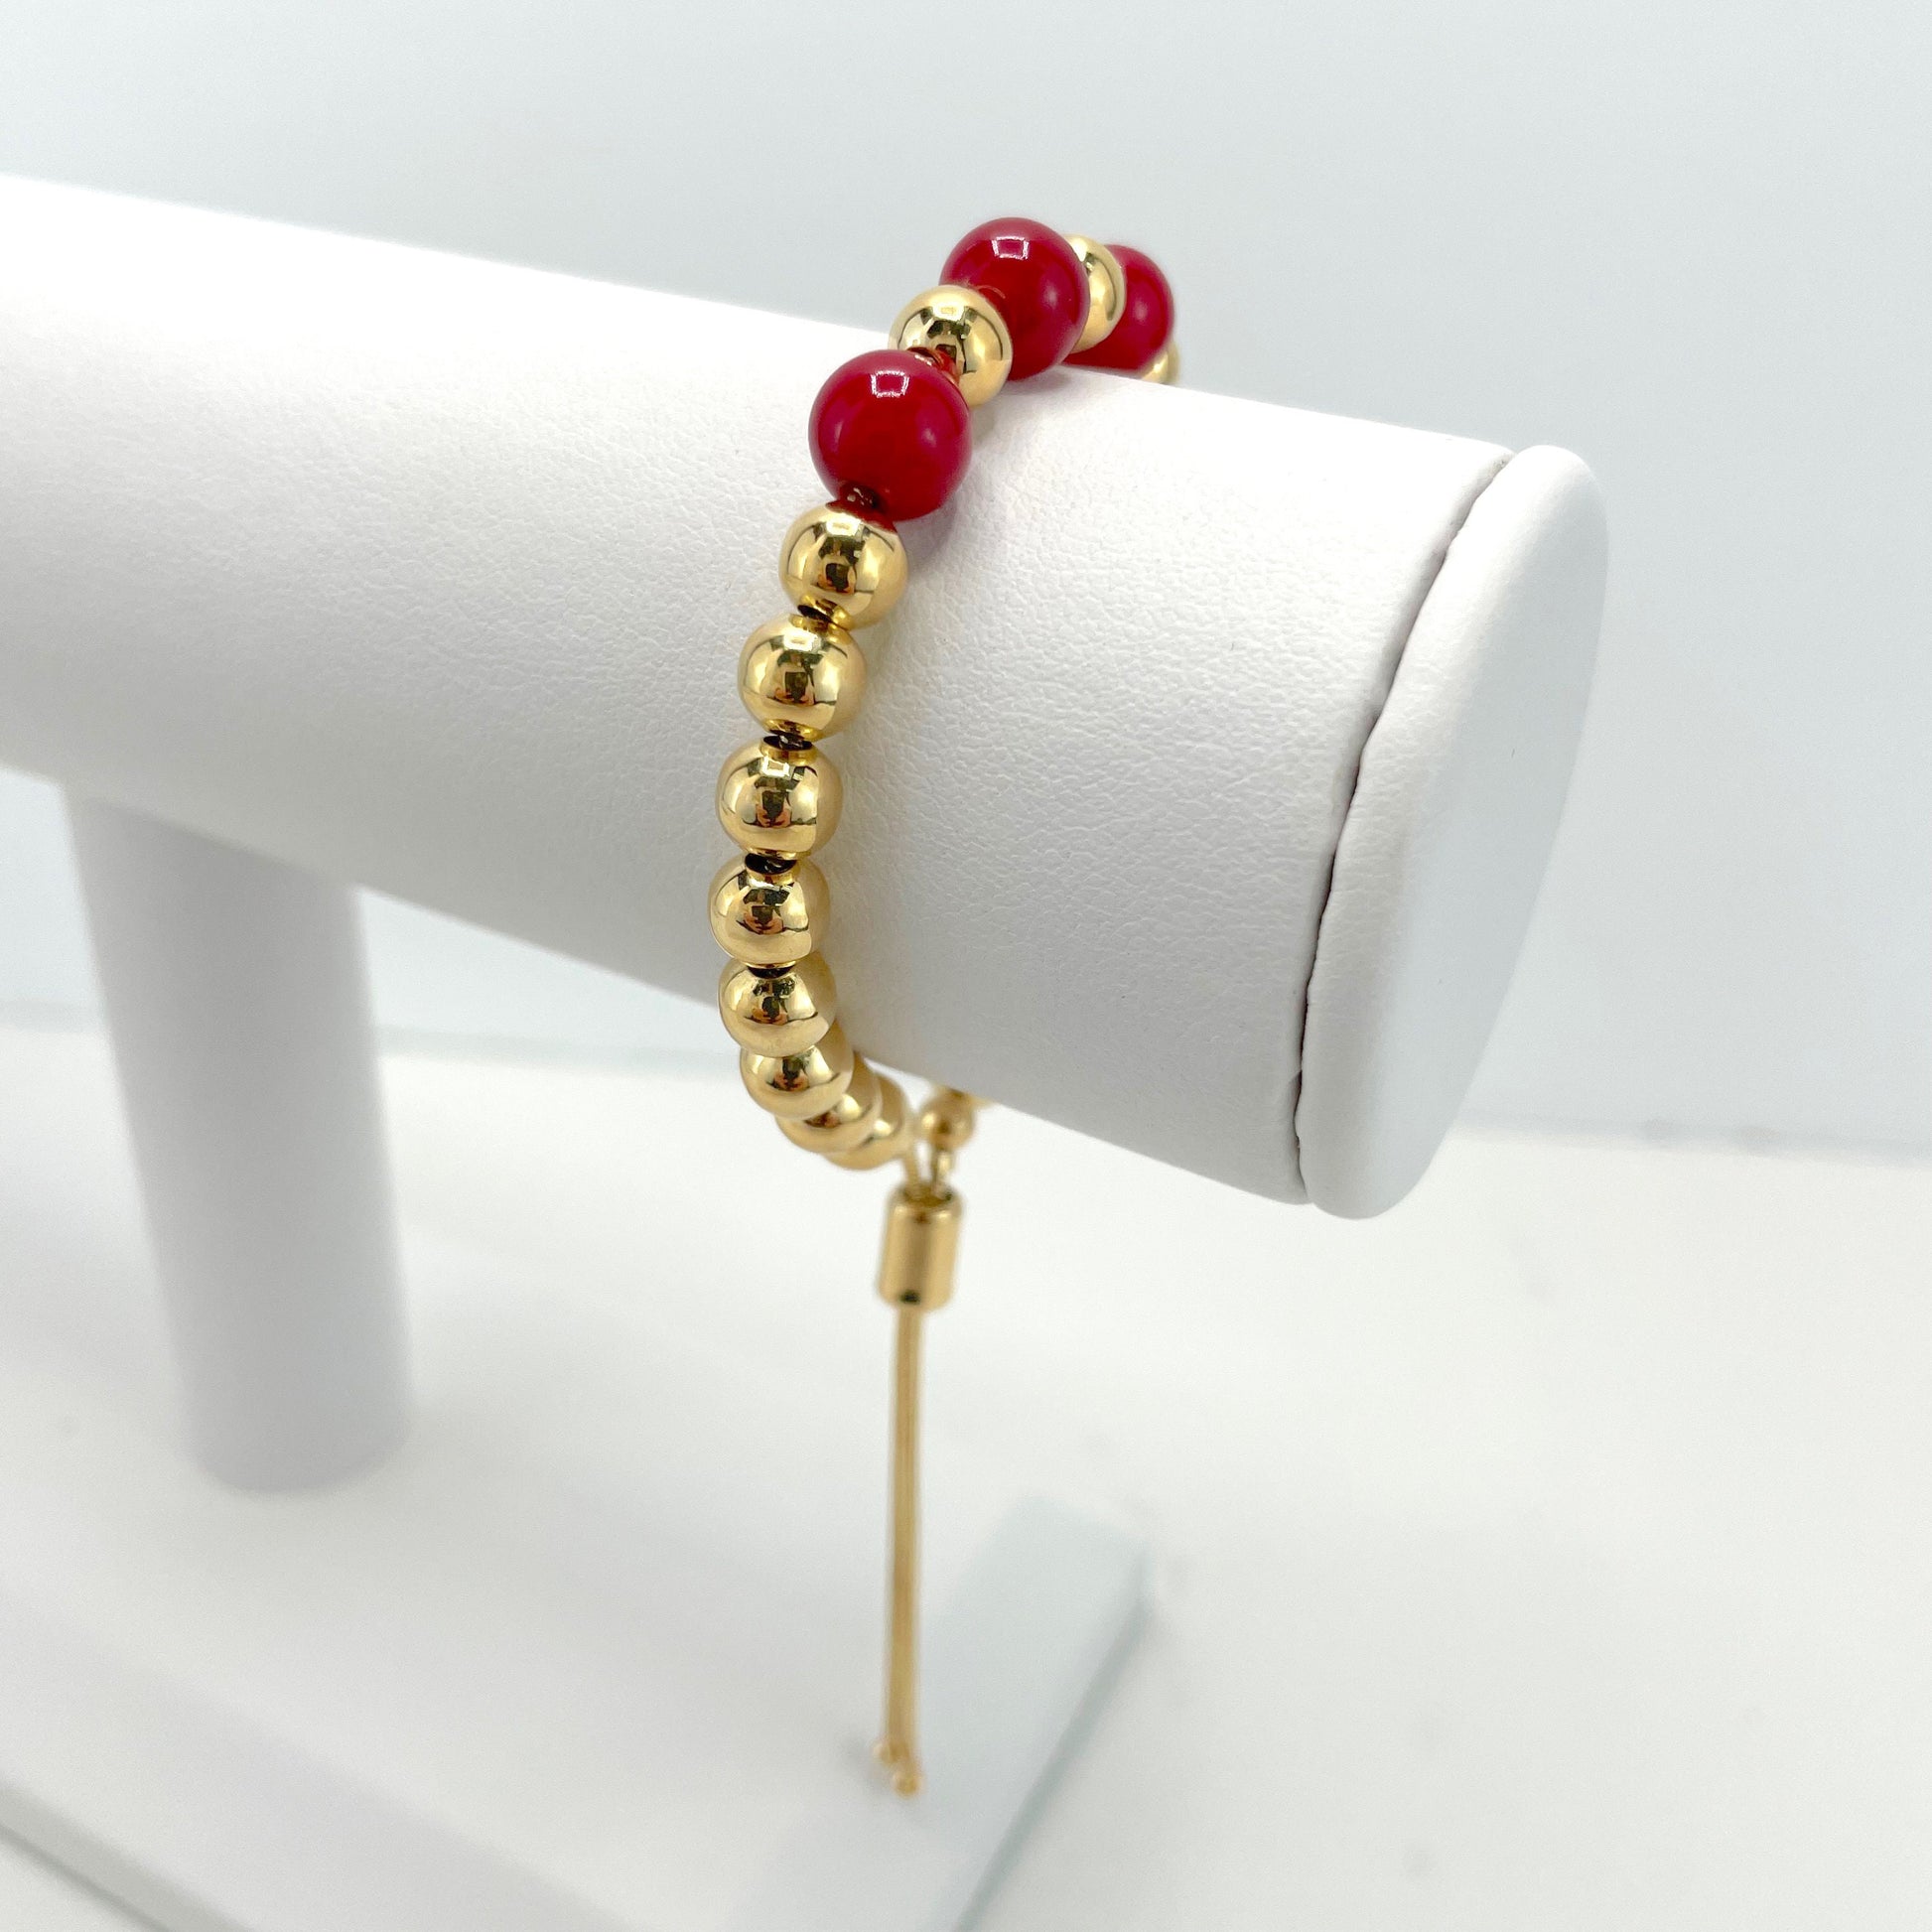 18k Gold Filled 1mm Box Chain Bracelet Adjustable Slide Clasp Featuring Red Ball, Wholesale Jewelry Making Supplies